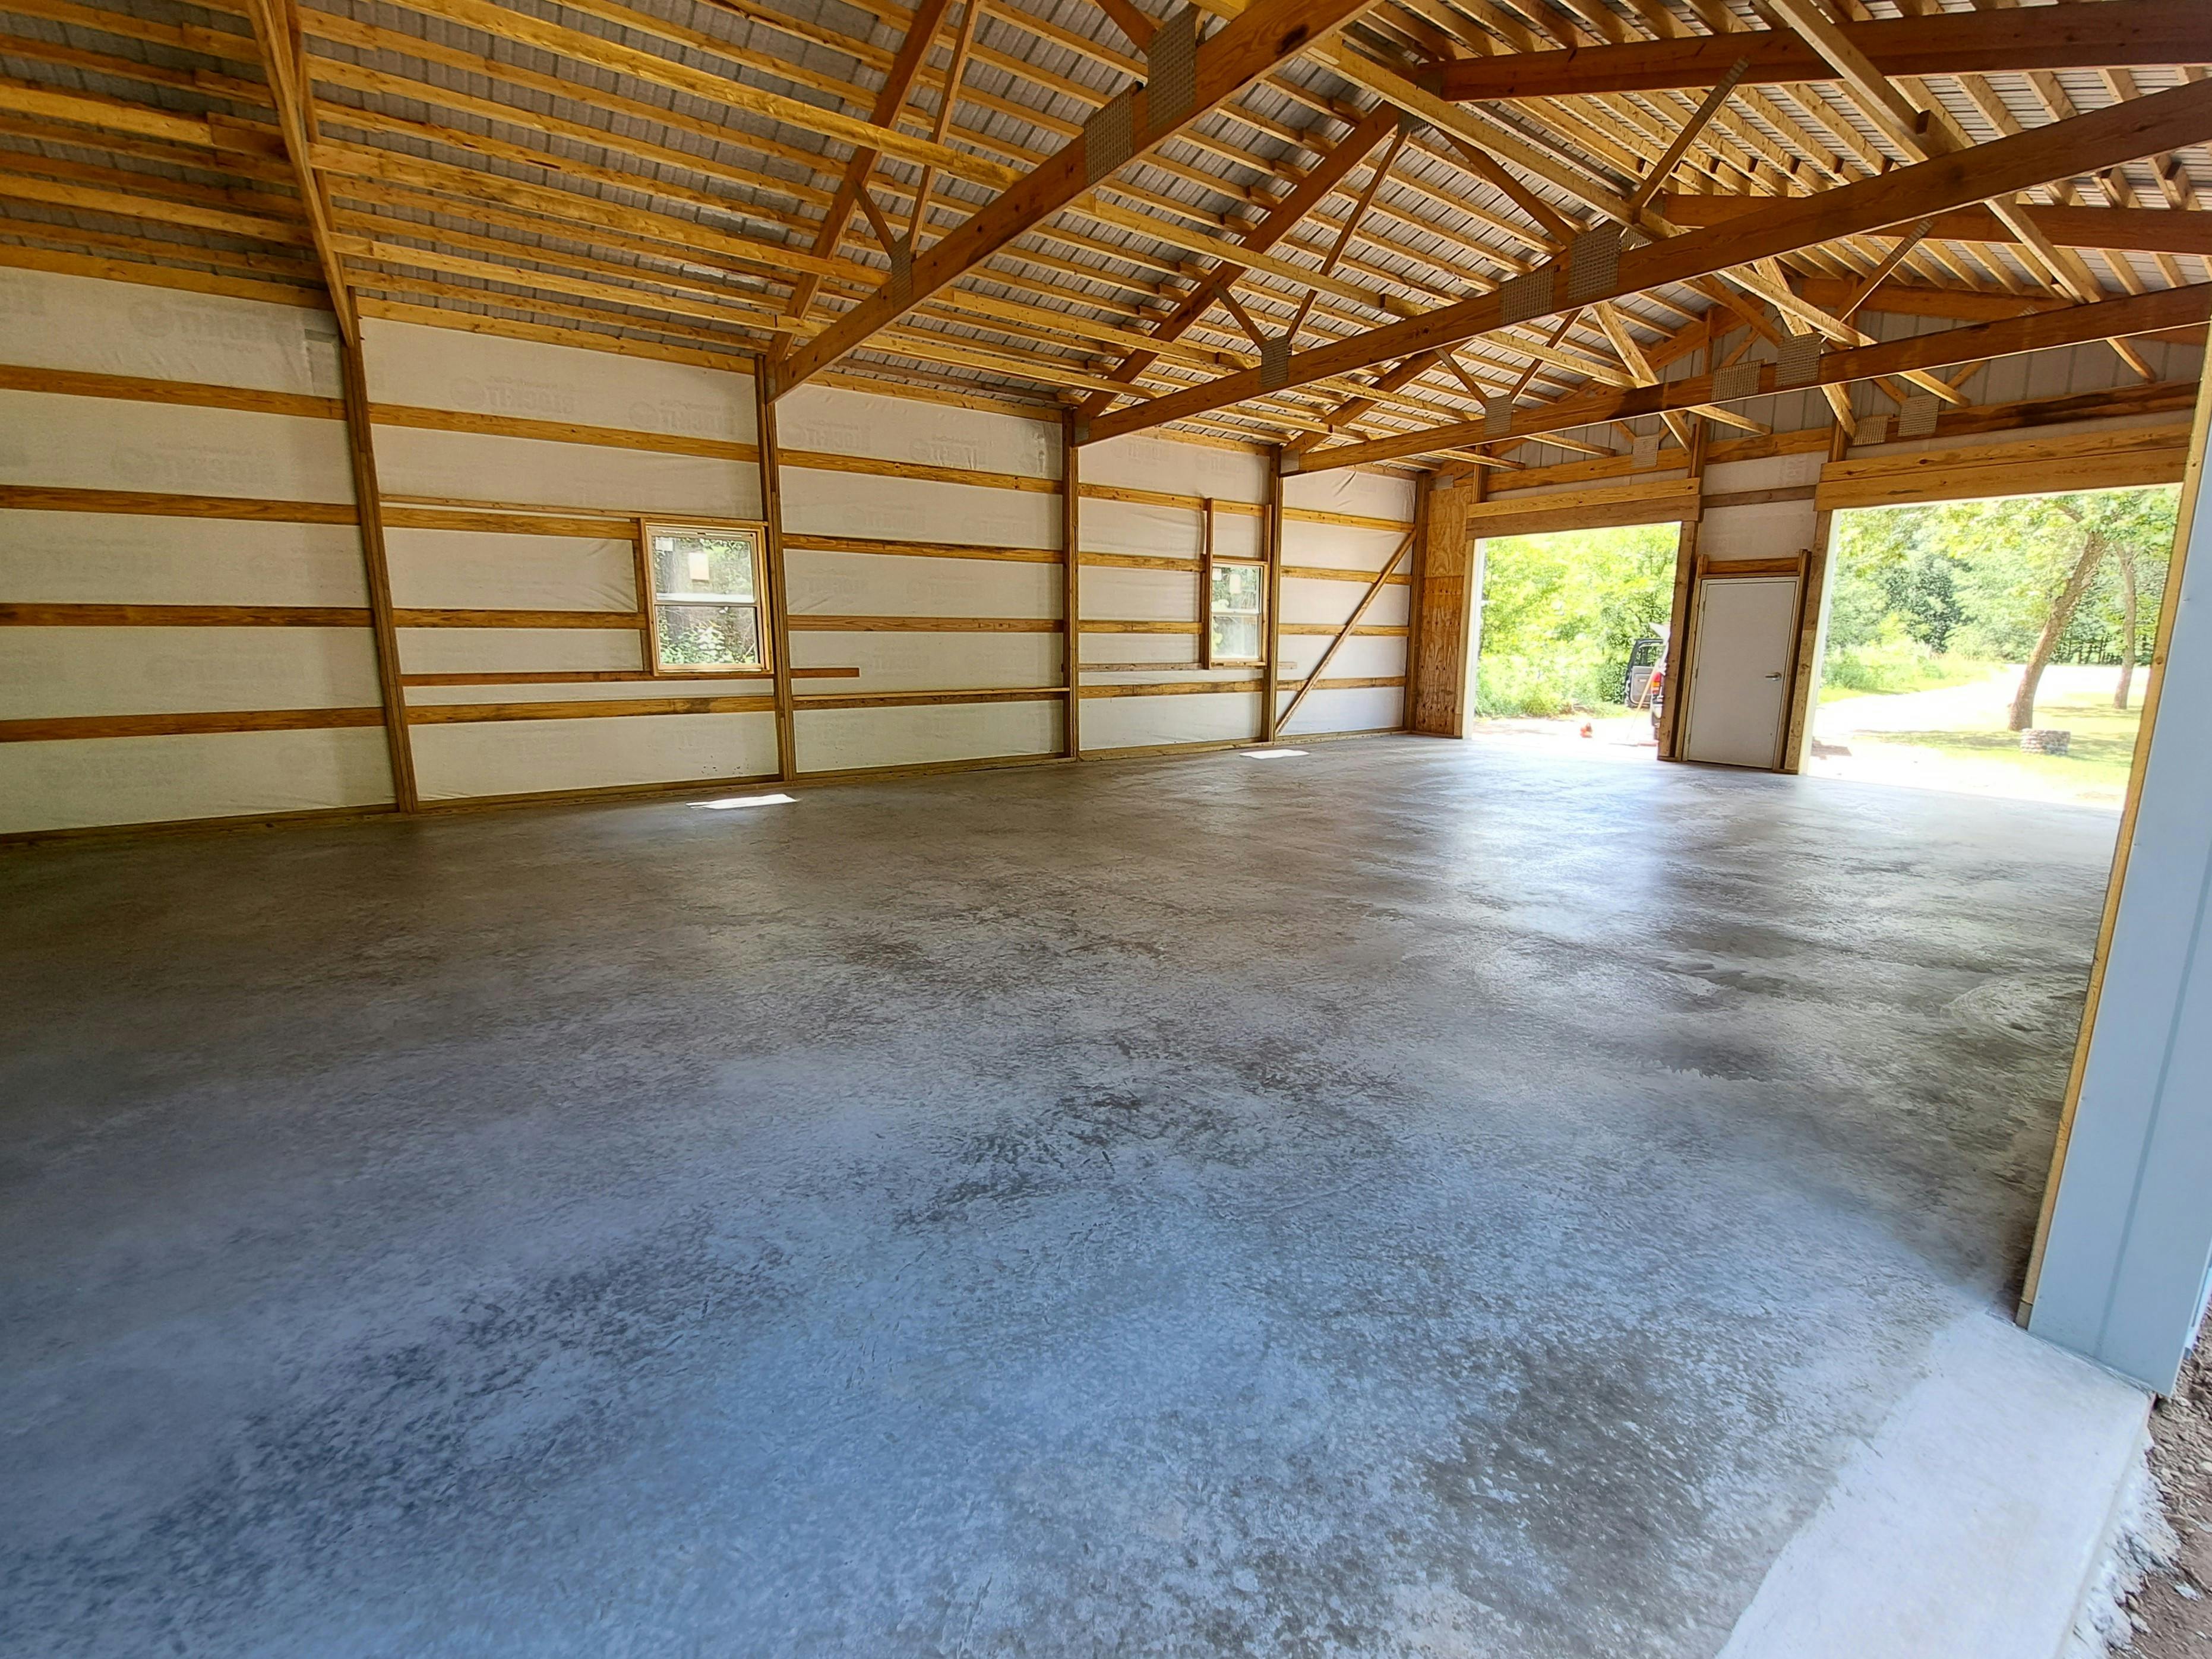 Picture of a new concrete floor in a hangar 